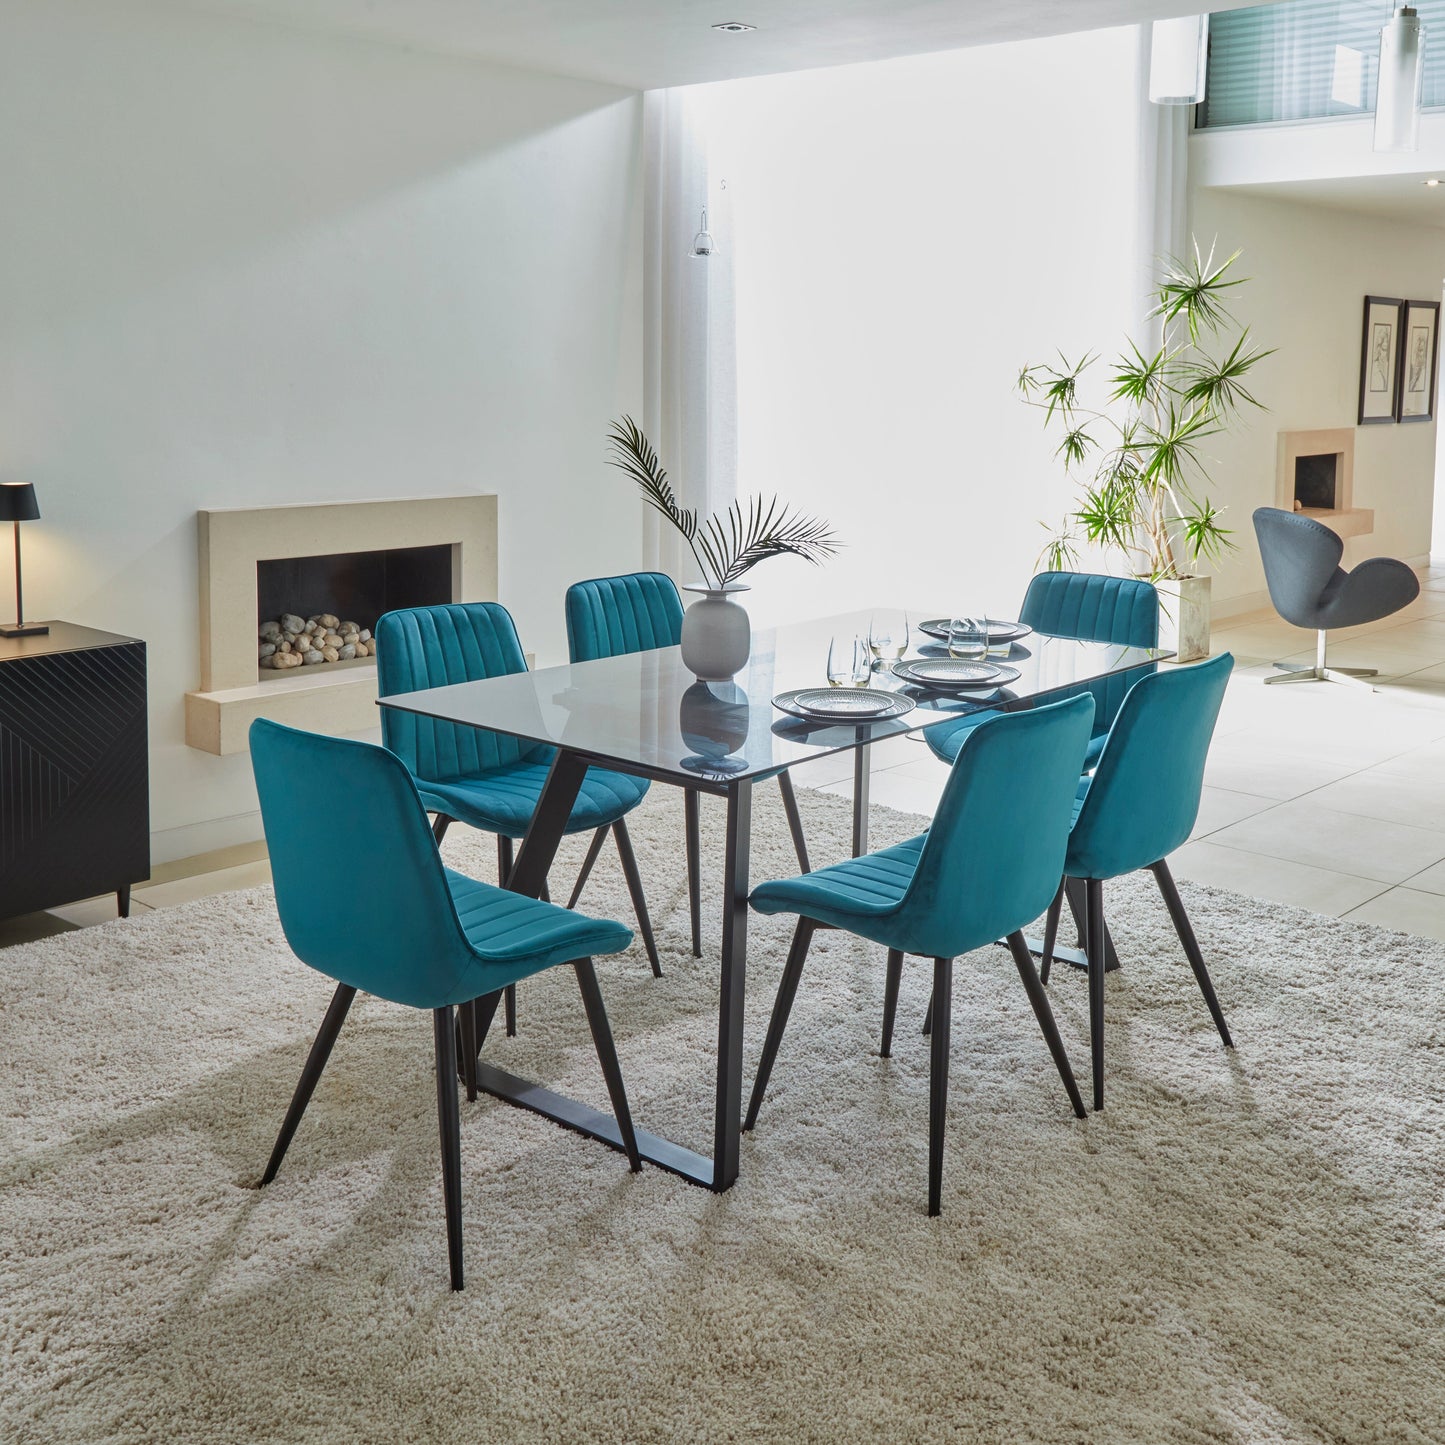 Atlas Glass Dining Table -  6 seater -  Bella Teal and Black Chairs